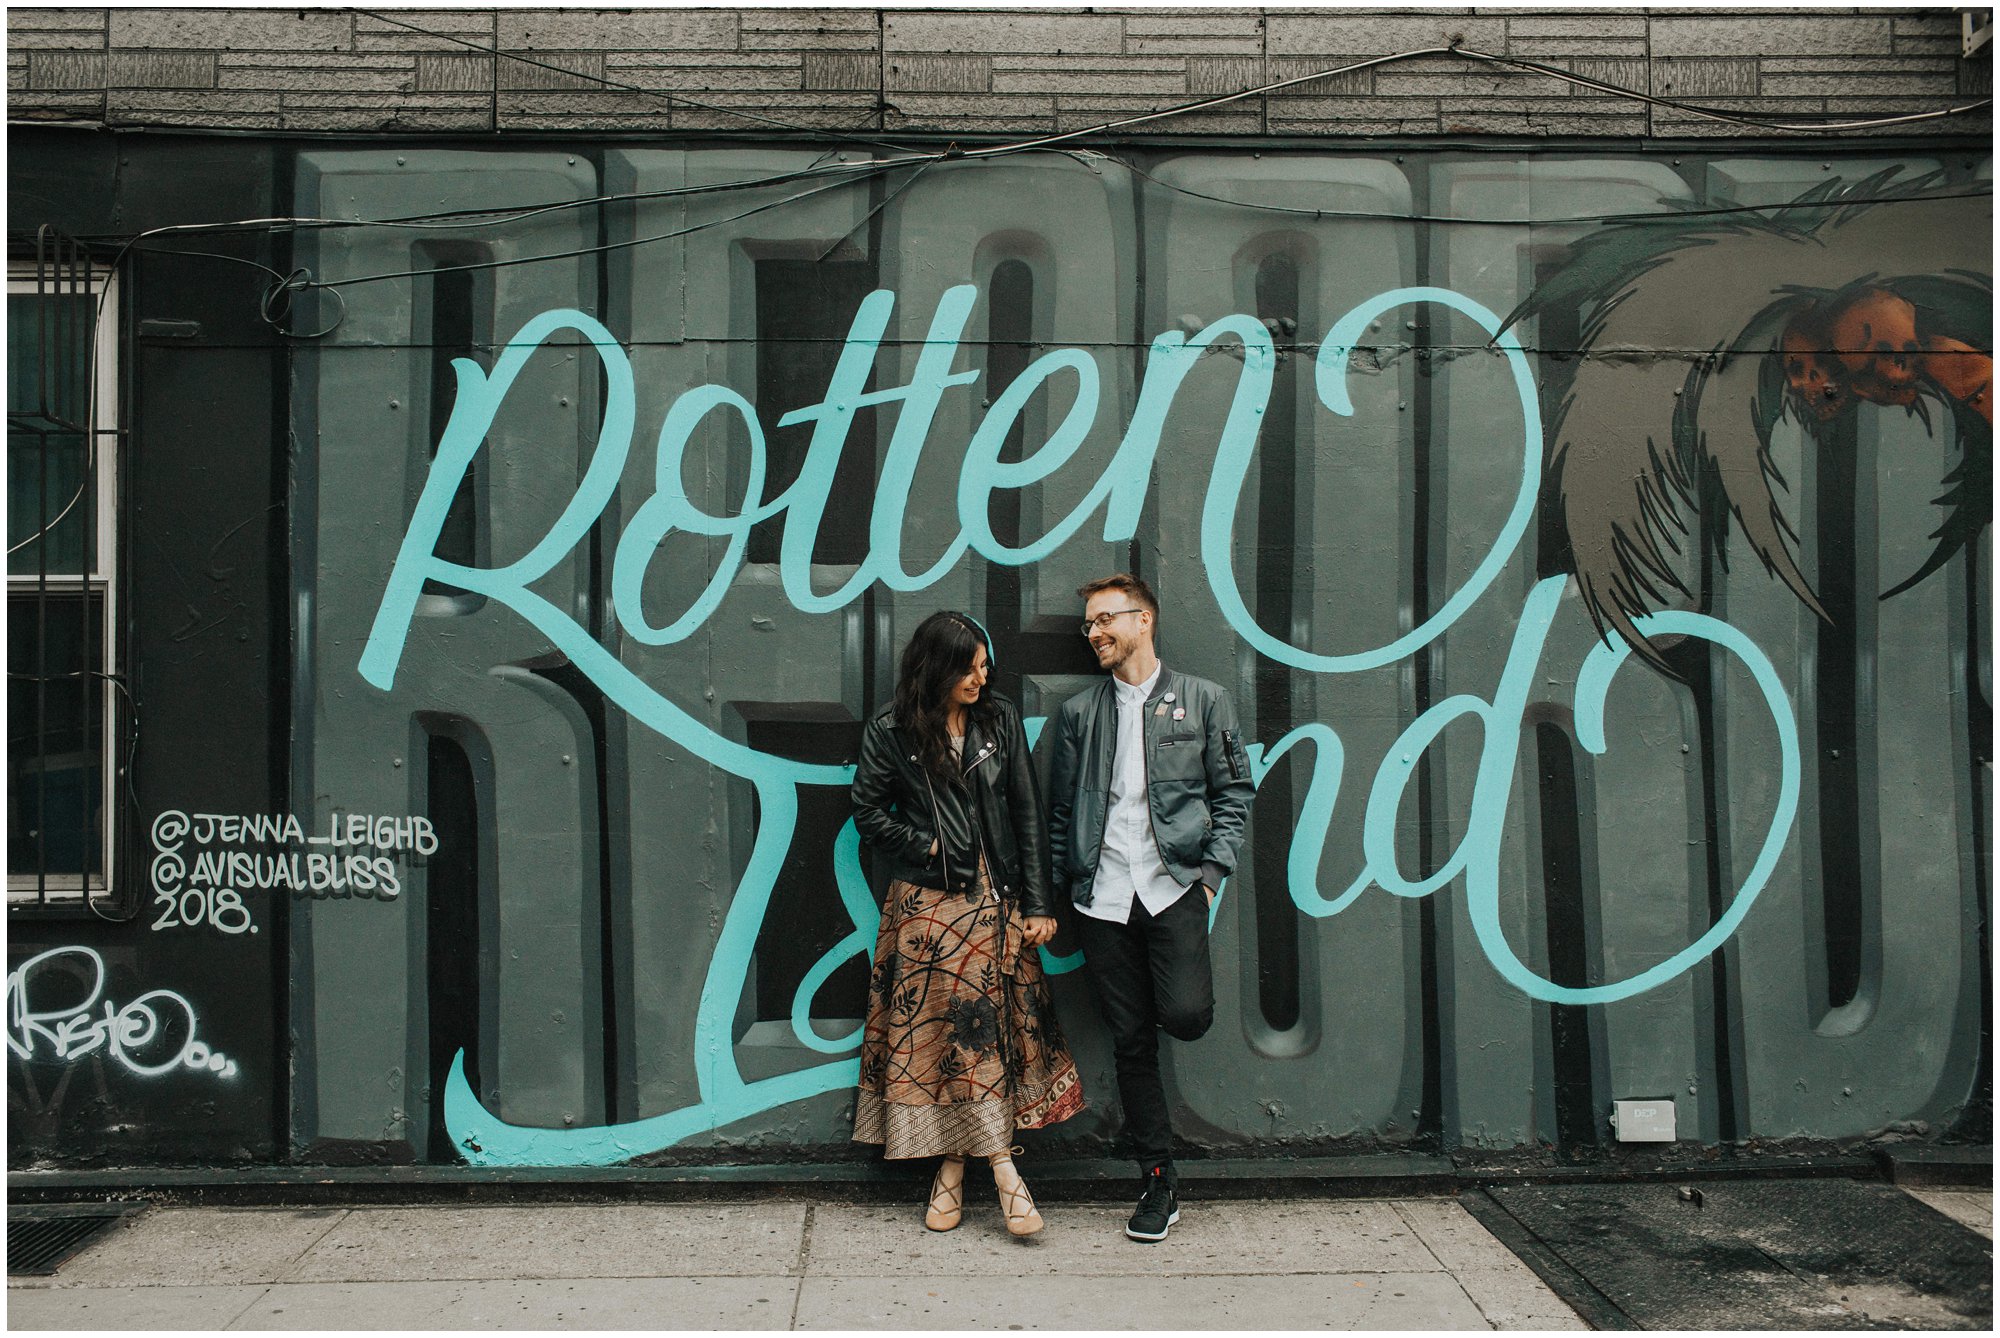 brooklyn engagement session in new york, new york photographer